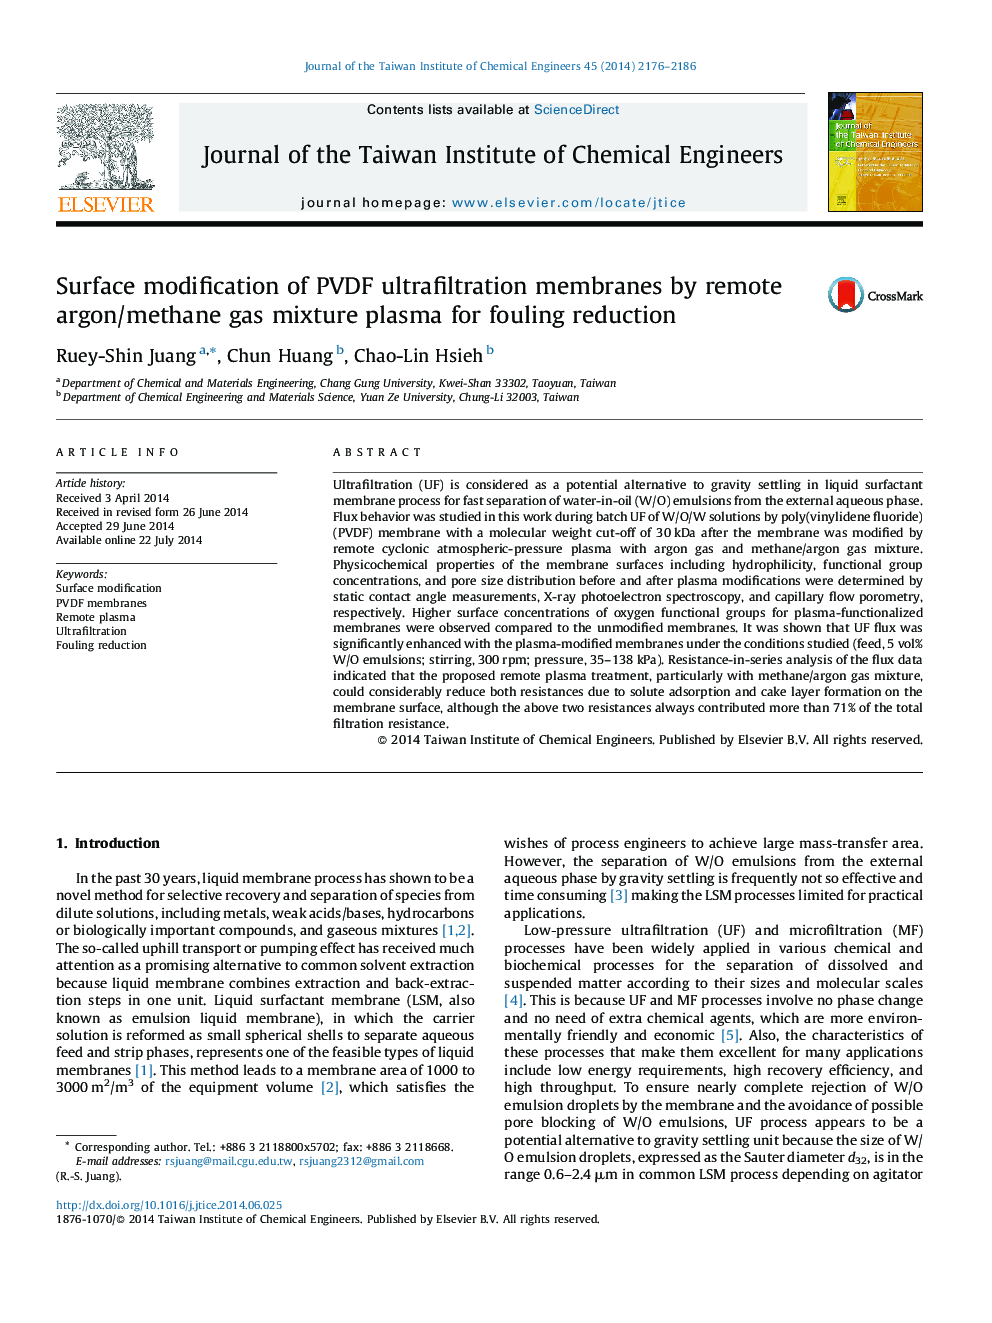 Surface modification of PVDF ultrafiltration membranes by remote argon/methane gas mixture plasma for fouling reduction